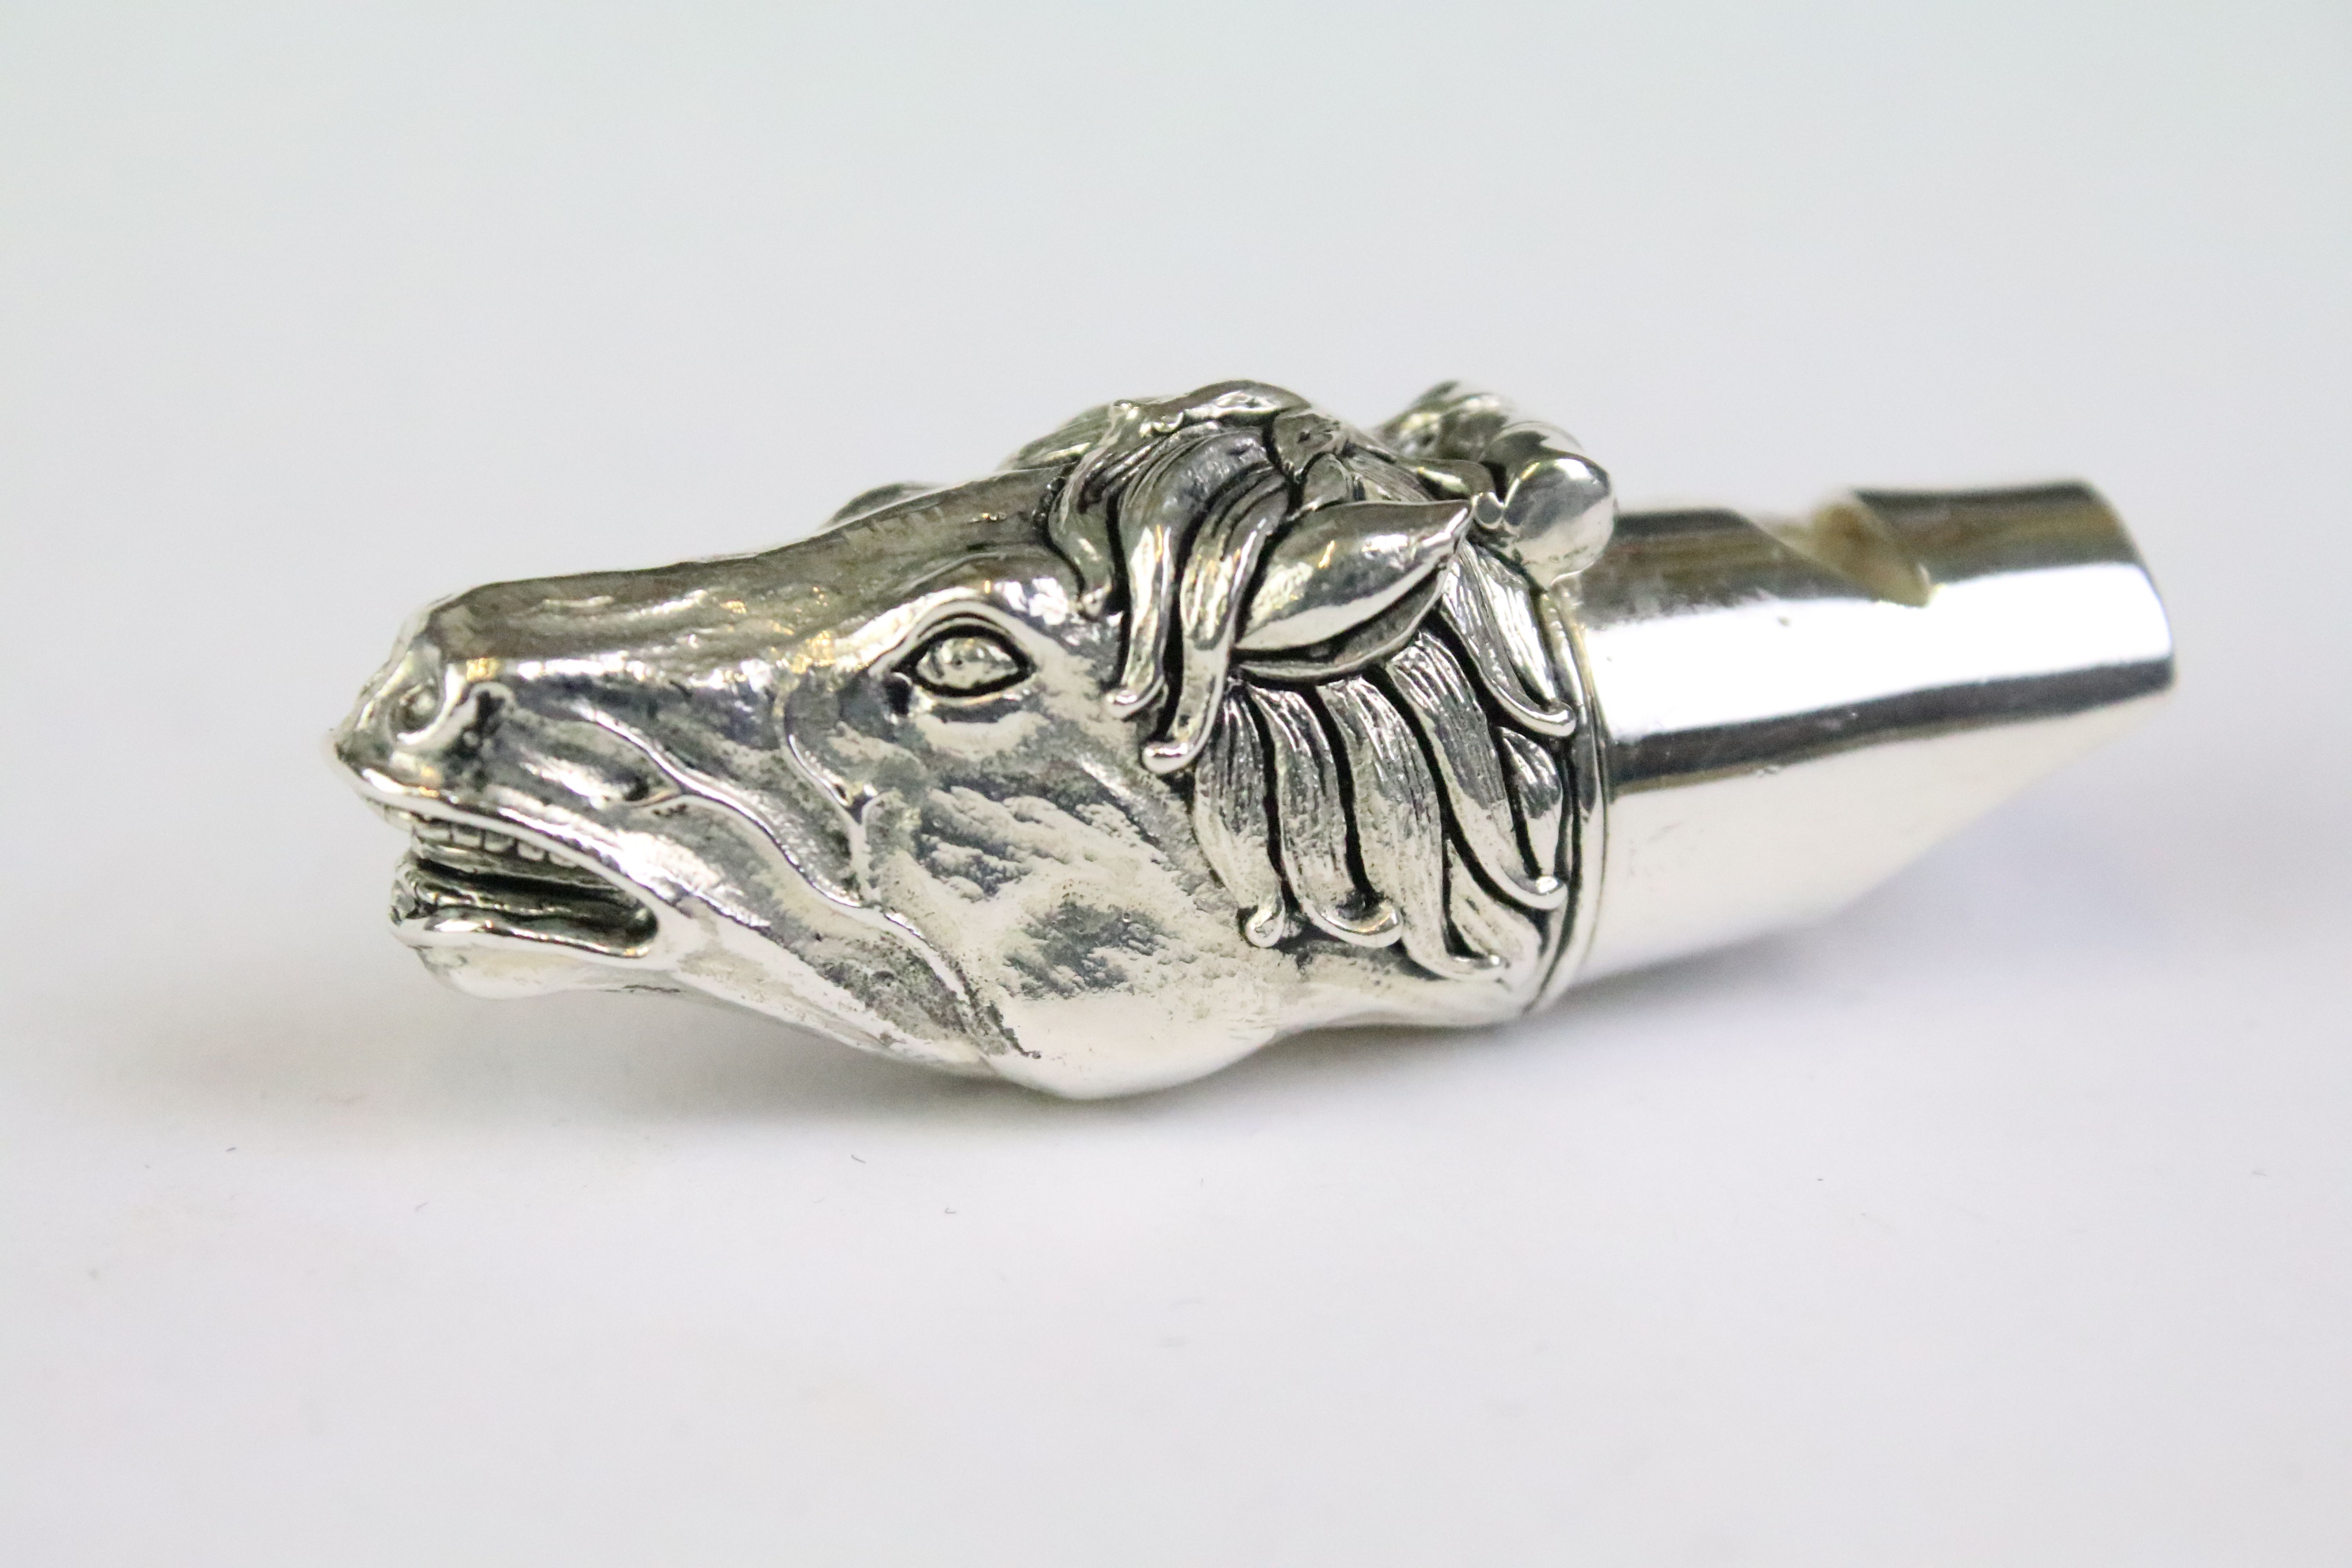 Substantial silver horse head whistle